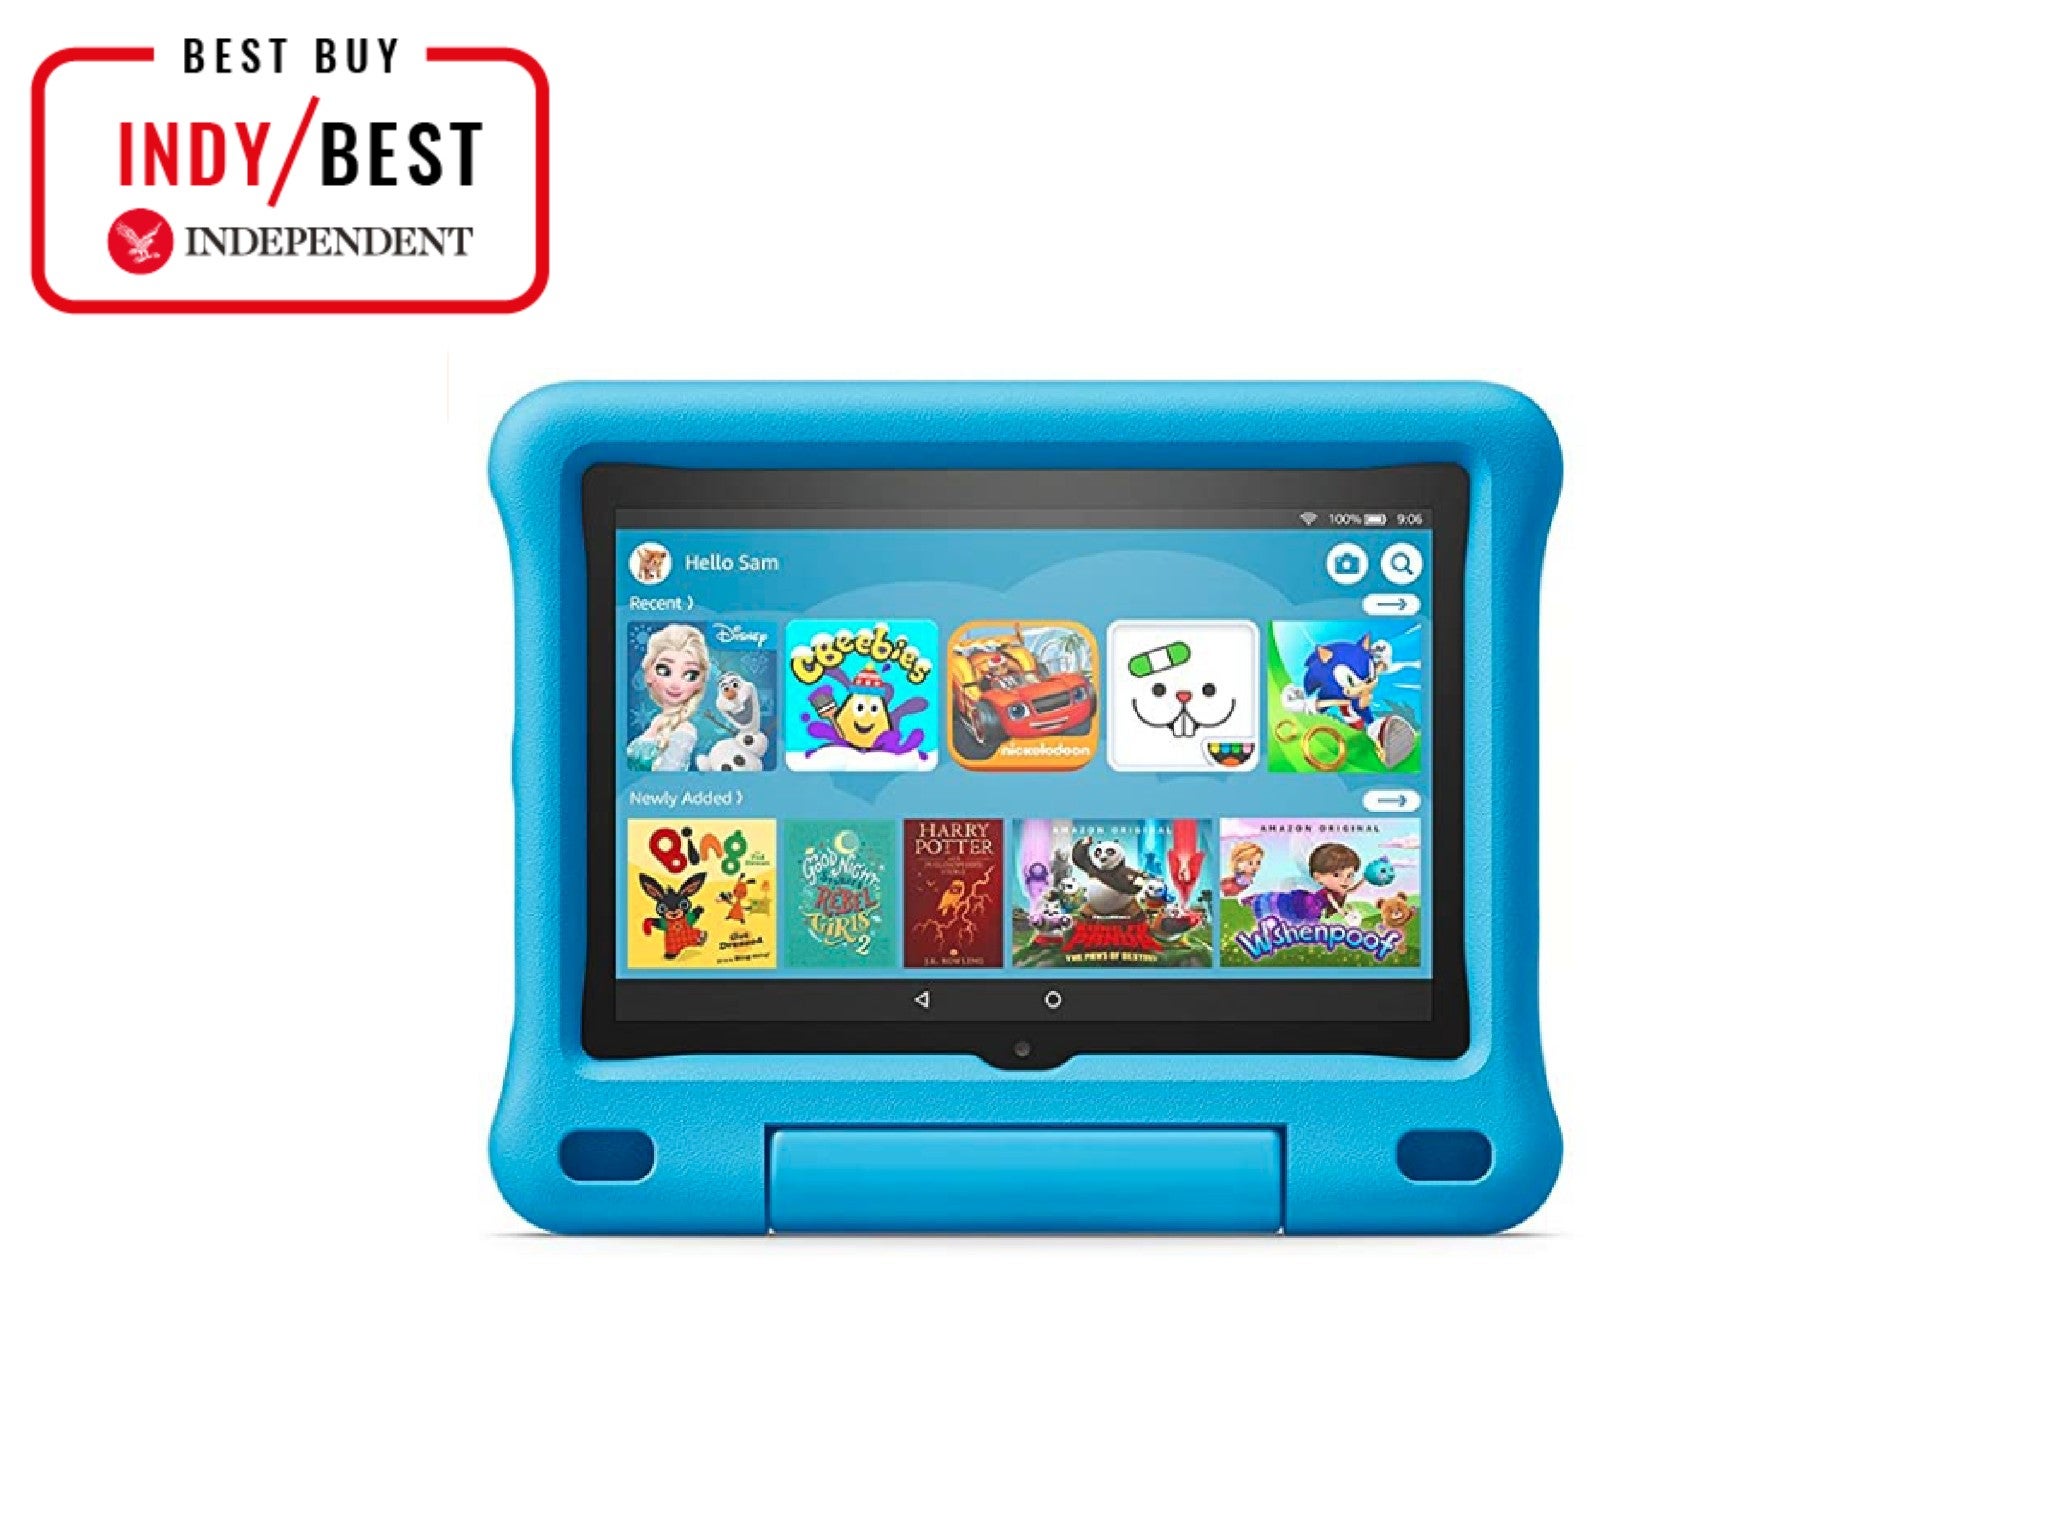 Amazon%20Fire%20HD%208%20Kids%20Edition%20Tablet